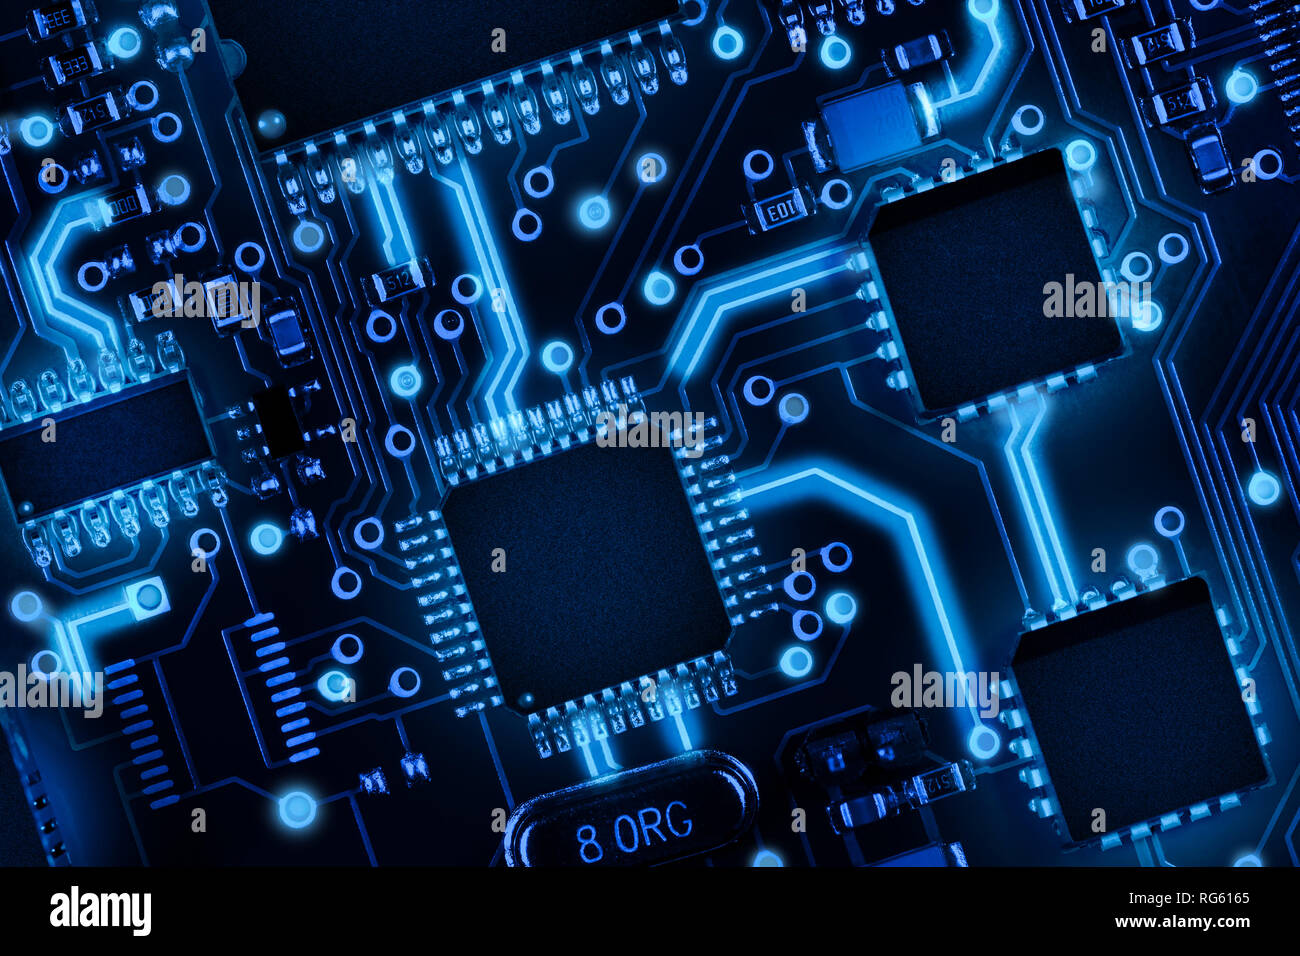 Printed circuit board with components, with highlighted connections between each element. Abstract high tech background. Stock Photo